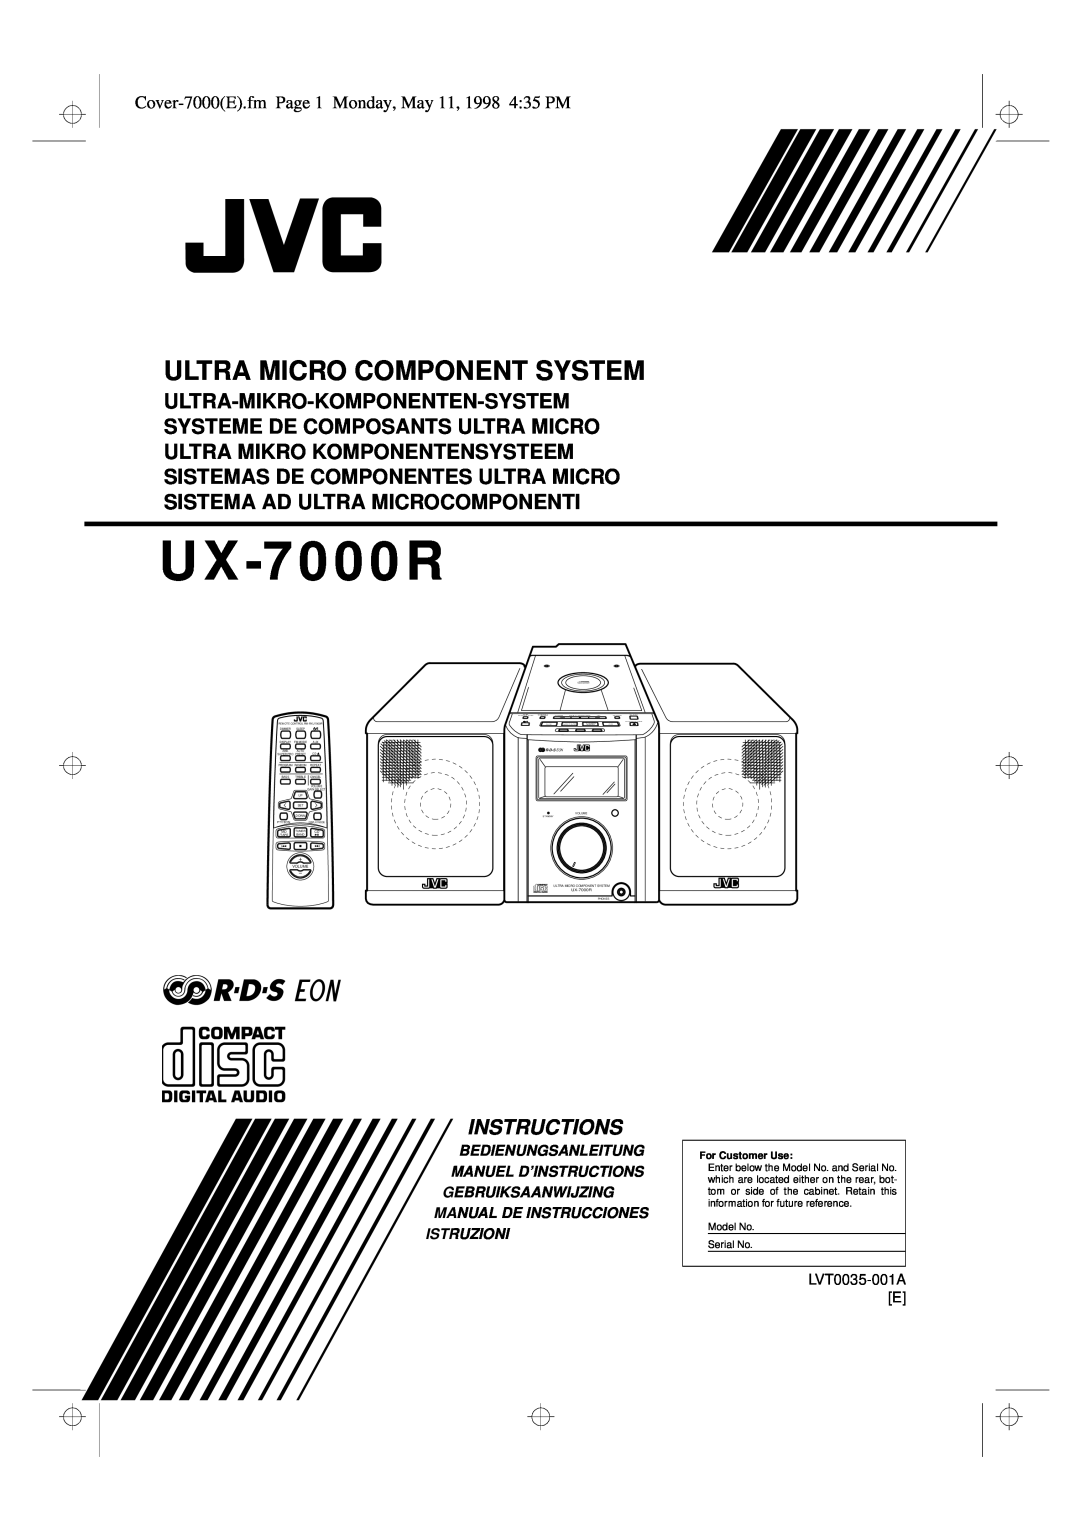 JVC UX-7000R manual Cover-7000E.fmPage 1 Monday, May 11, 1998 4 35 PM, Bedienungsanleitung Manuel D’Instructions 